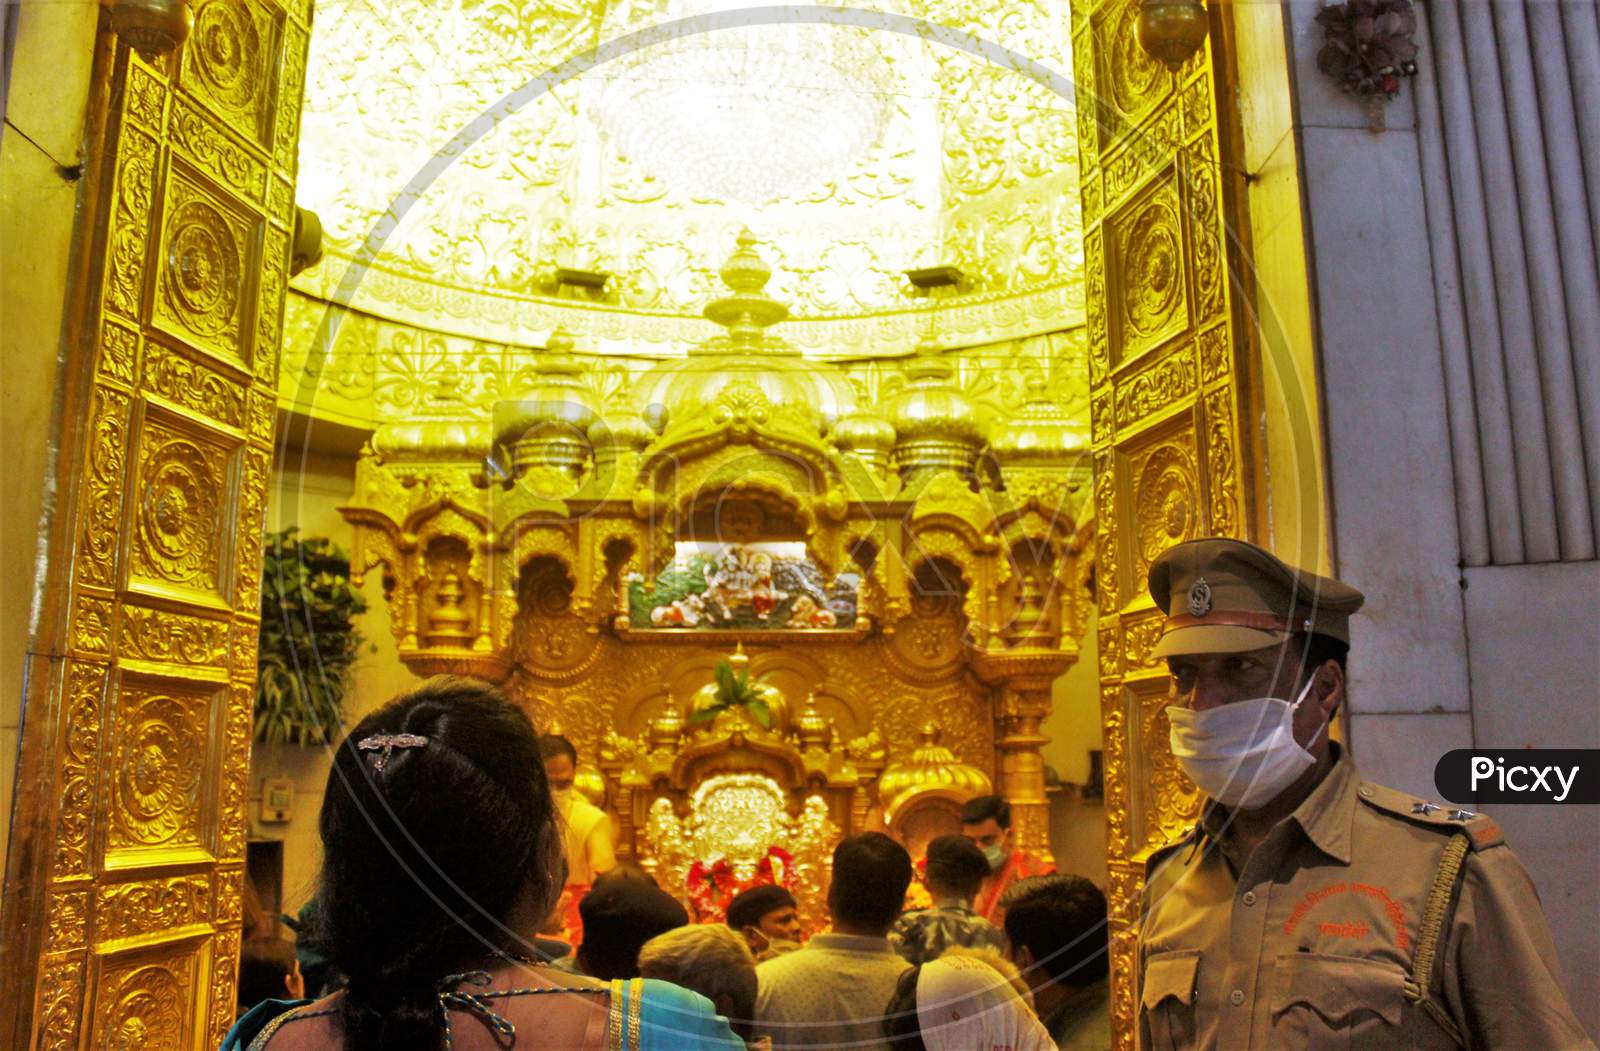 A security officer wearing a protective mask stands guard inside a temple in Mumbai, India March 13, 2020.